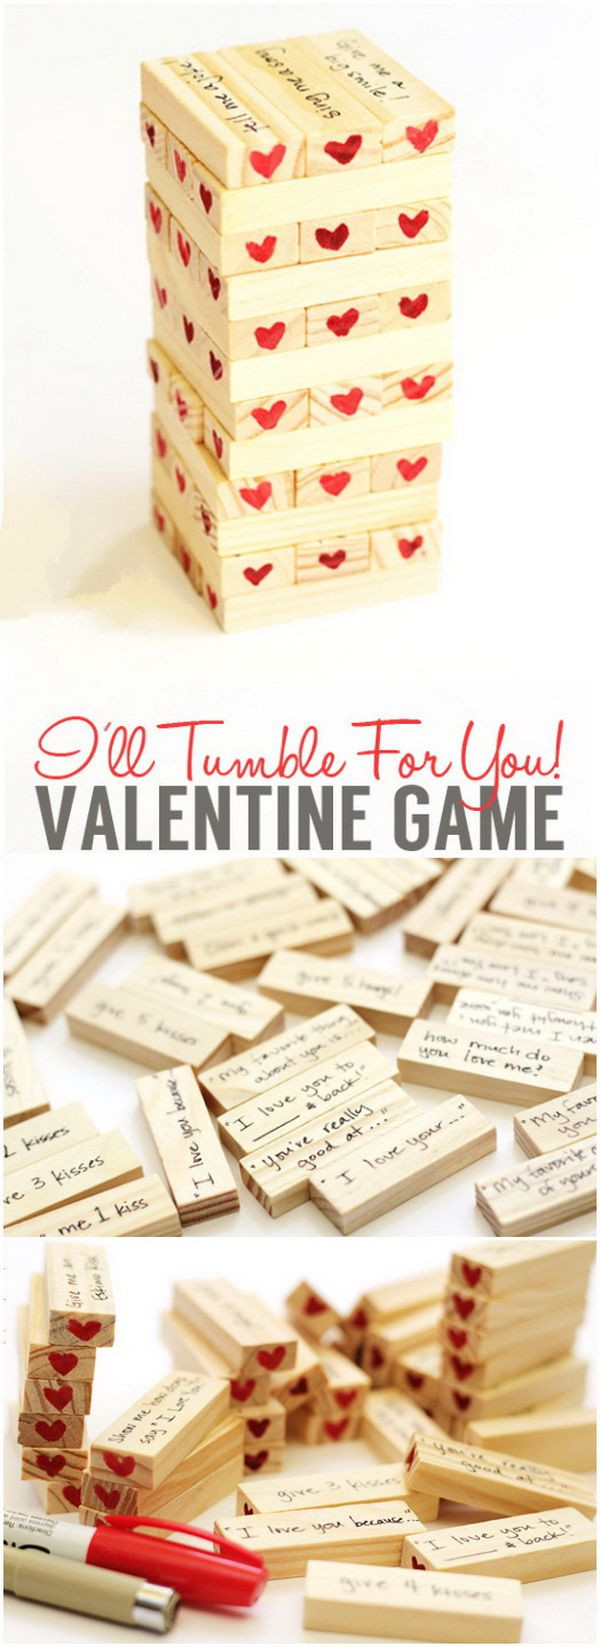 Cute DIY Valentine Day Gifts For Boyfriend
 Valentine’s Day Hearty Tumble Game Another fun t idea